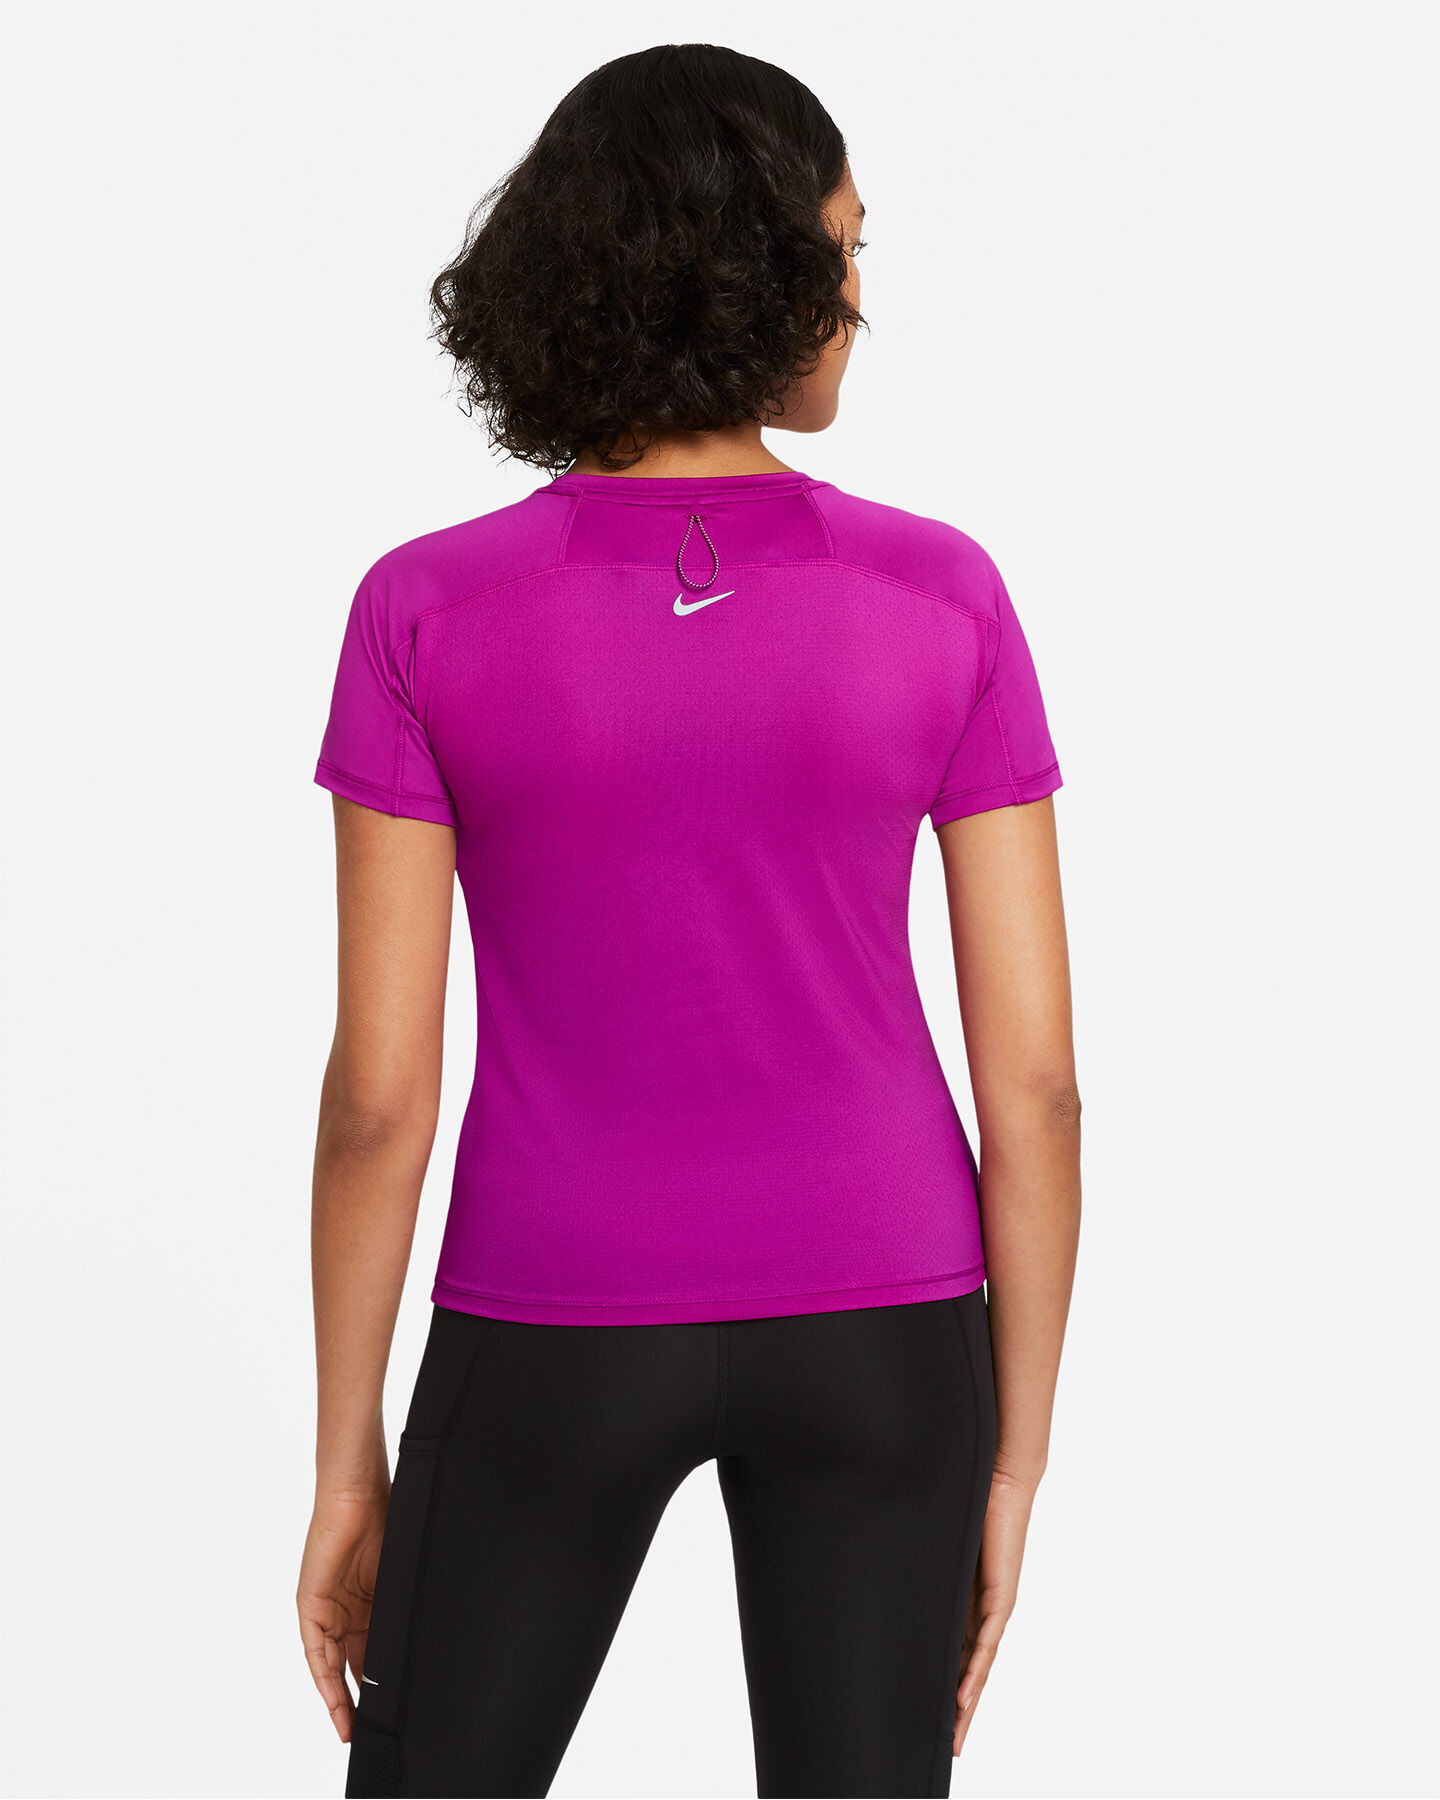  T-Shirt running NIKE RUN DIVISION MILER W S5270219|584|XS scatto 1